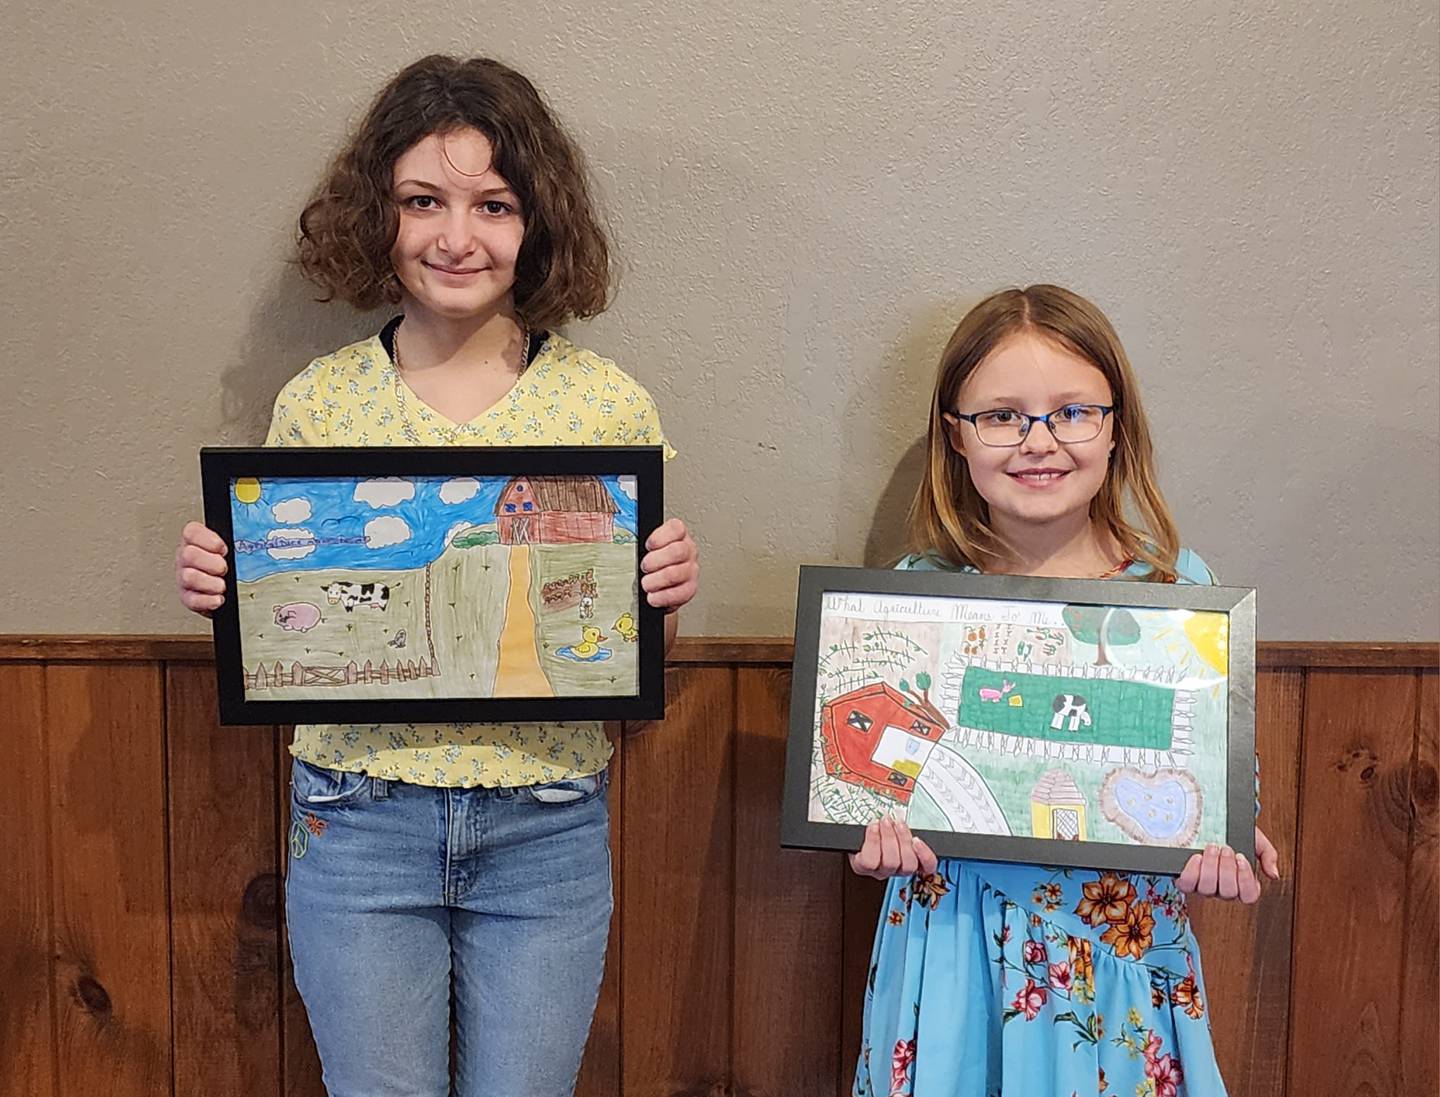 The two winners of the placemat contest were announced as Leah Donnelly and Kensi Haney, both of Bureau Valley North Elementary in Walnut.